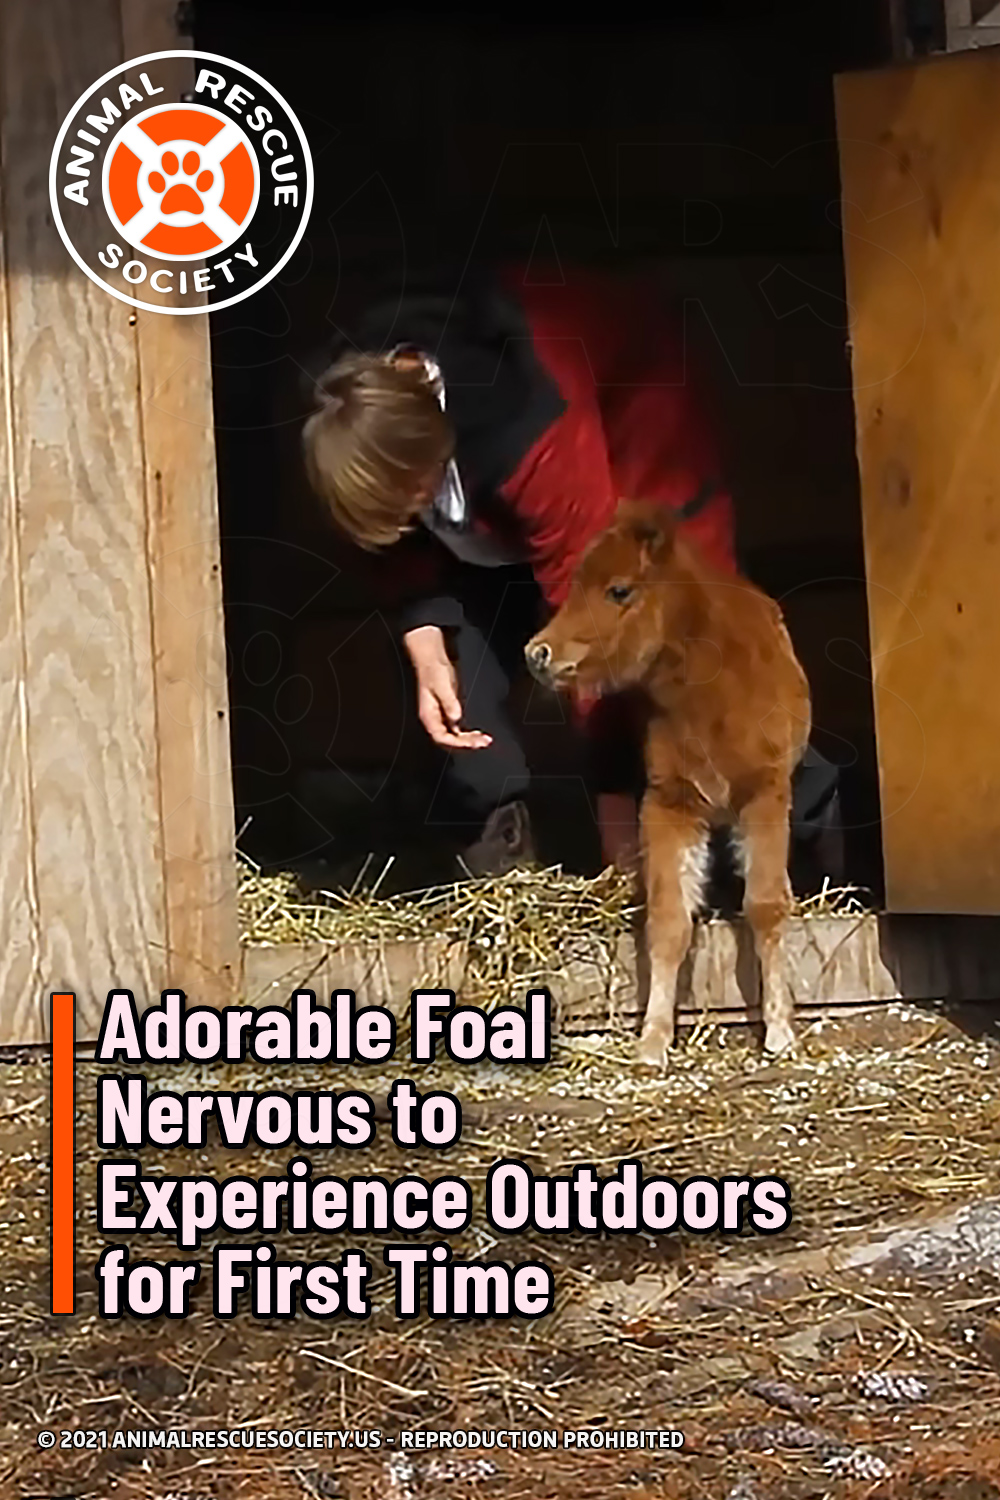 Adorable Foal Nervous to Experience Outdoors for First Time